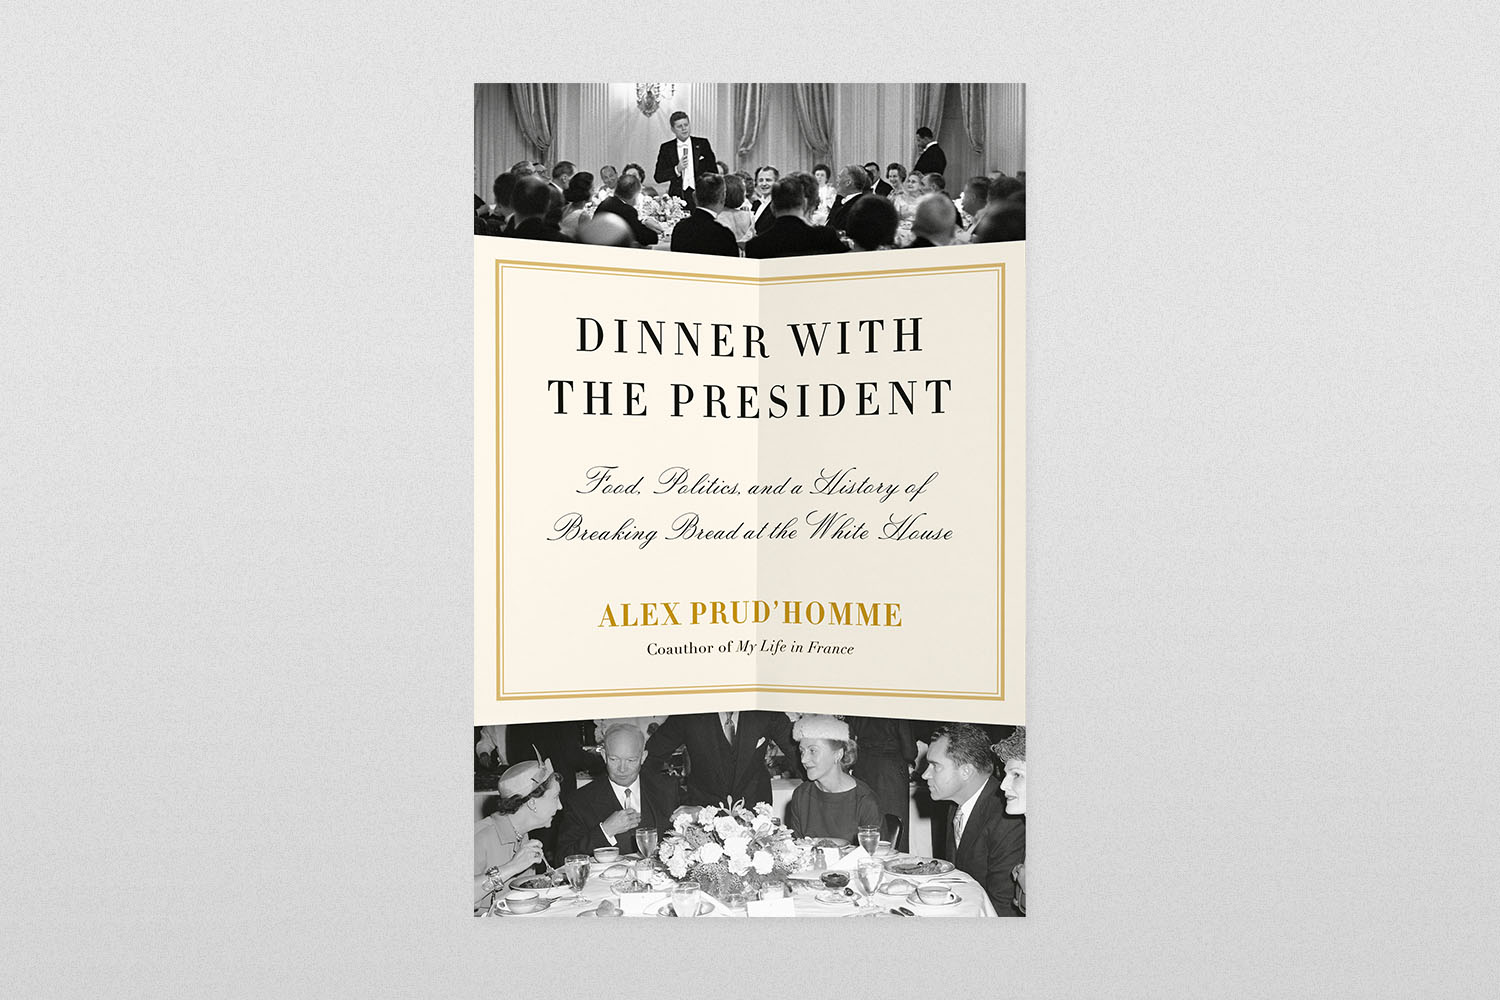 Dinner with the President- Food, Politics, and a History of Breaking Bread at the White House by Alex Prud'homme